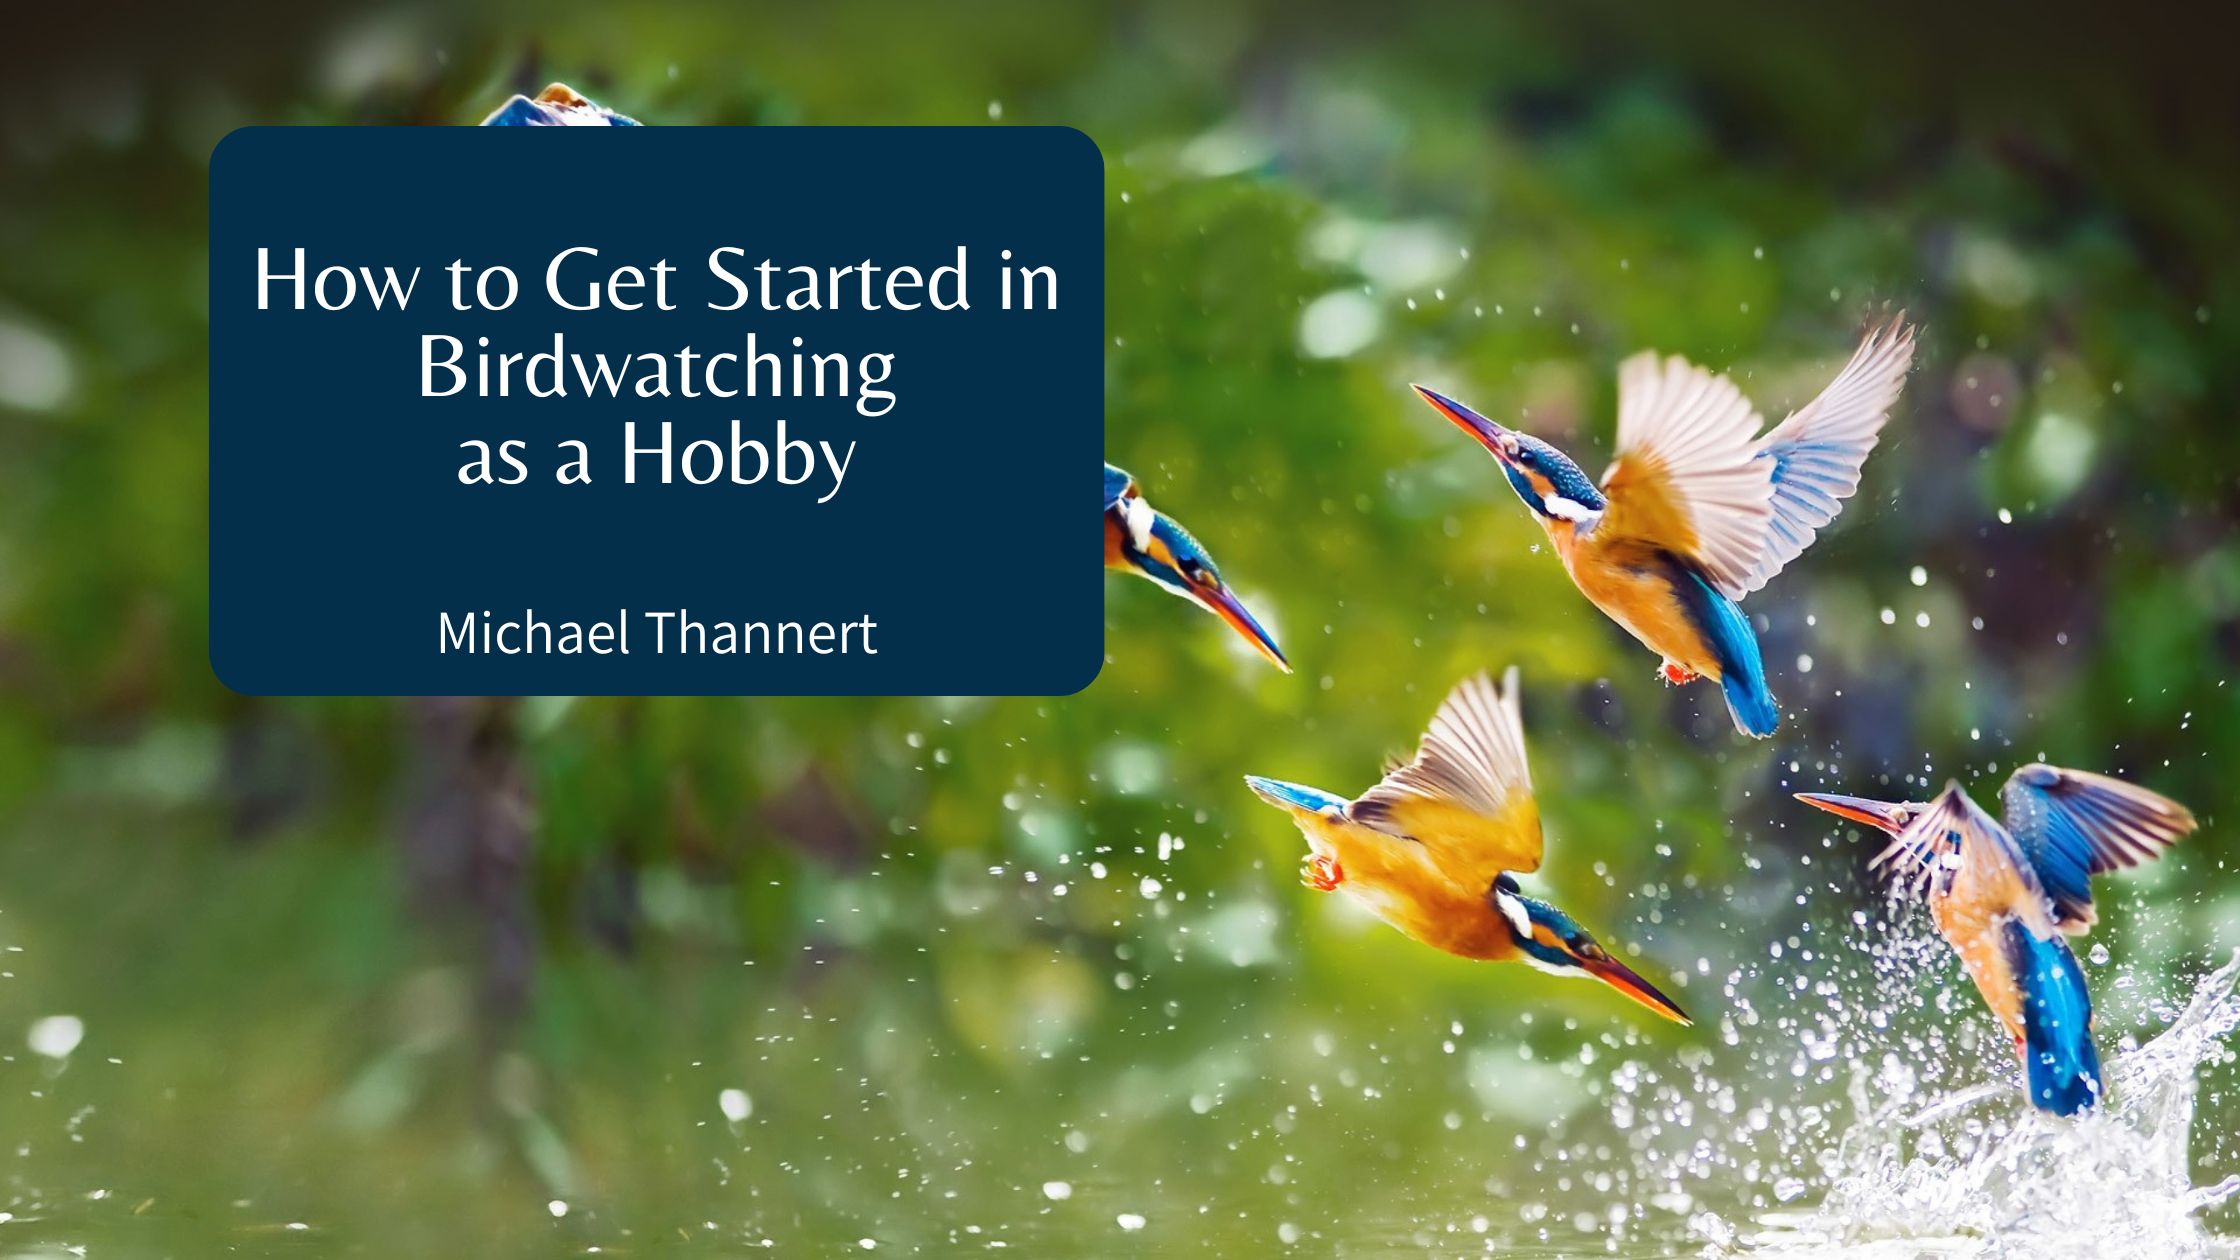 Michael Thannert - How to Get Started in Birdwatching as a Hobby